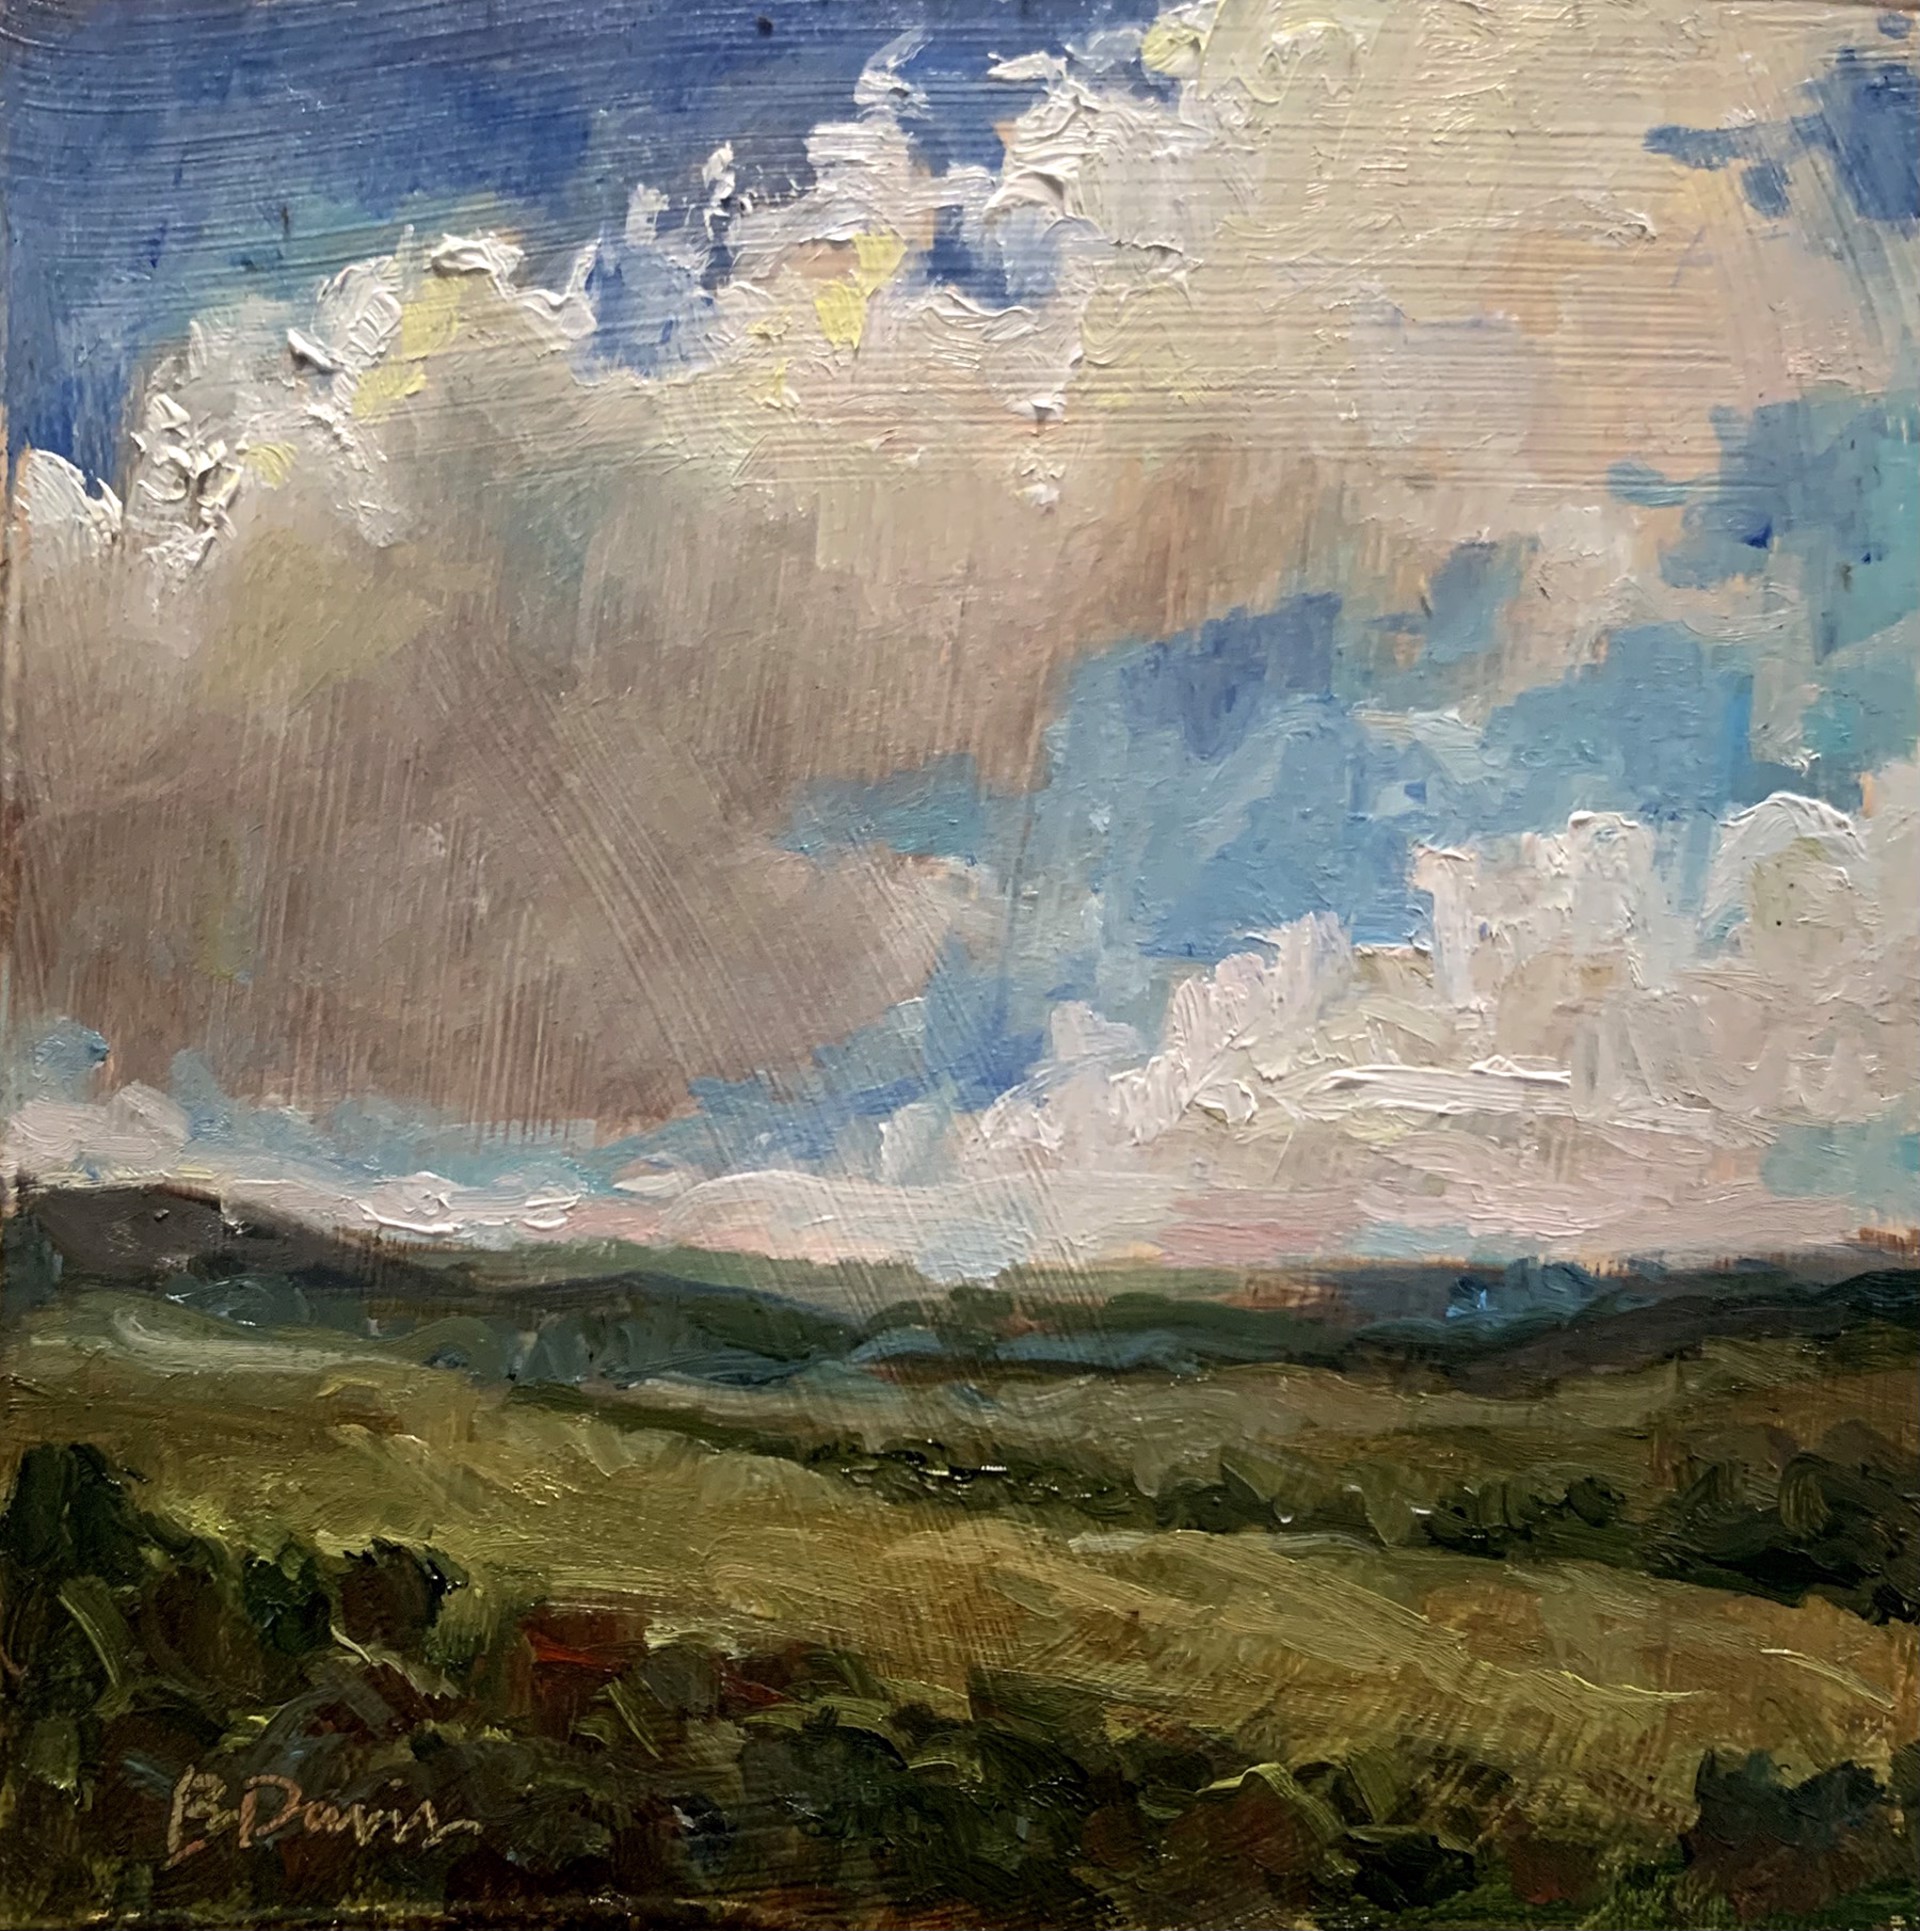 Over the Hill by Barbara Davis